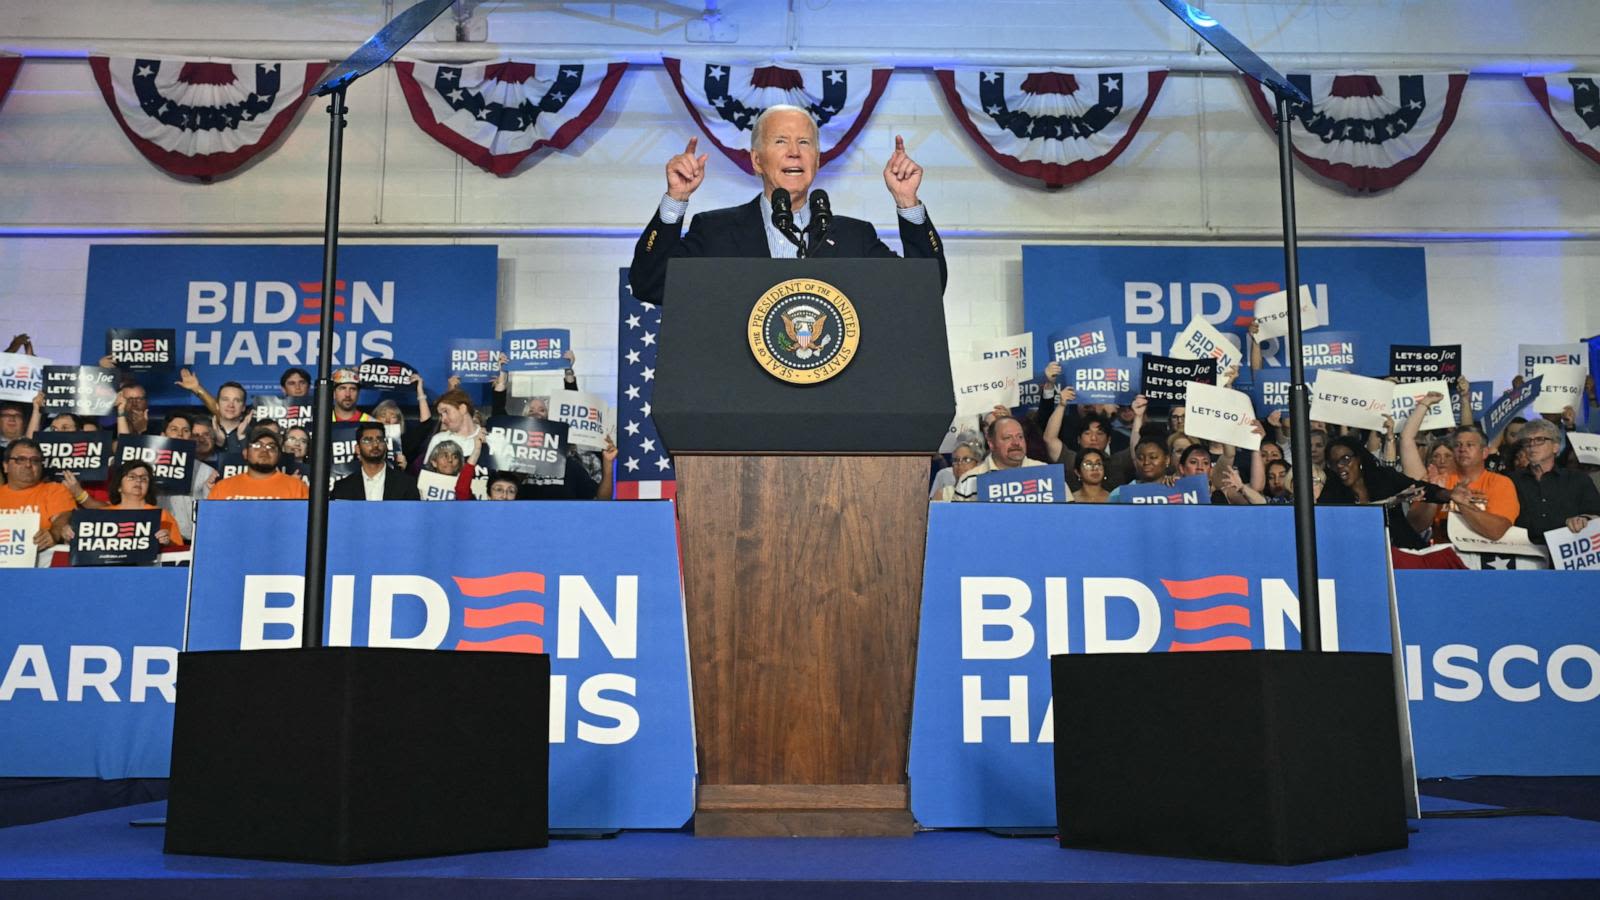 Biden, defiant in crisis, holds fiery campaign rally in Wisconsin ahead of pivotal ABC News interview